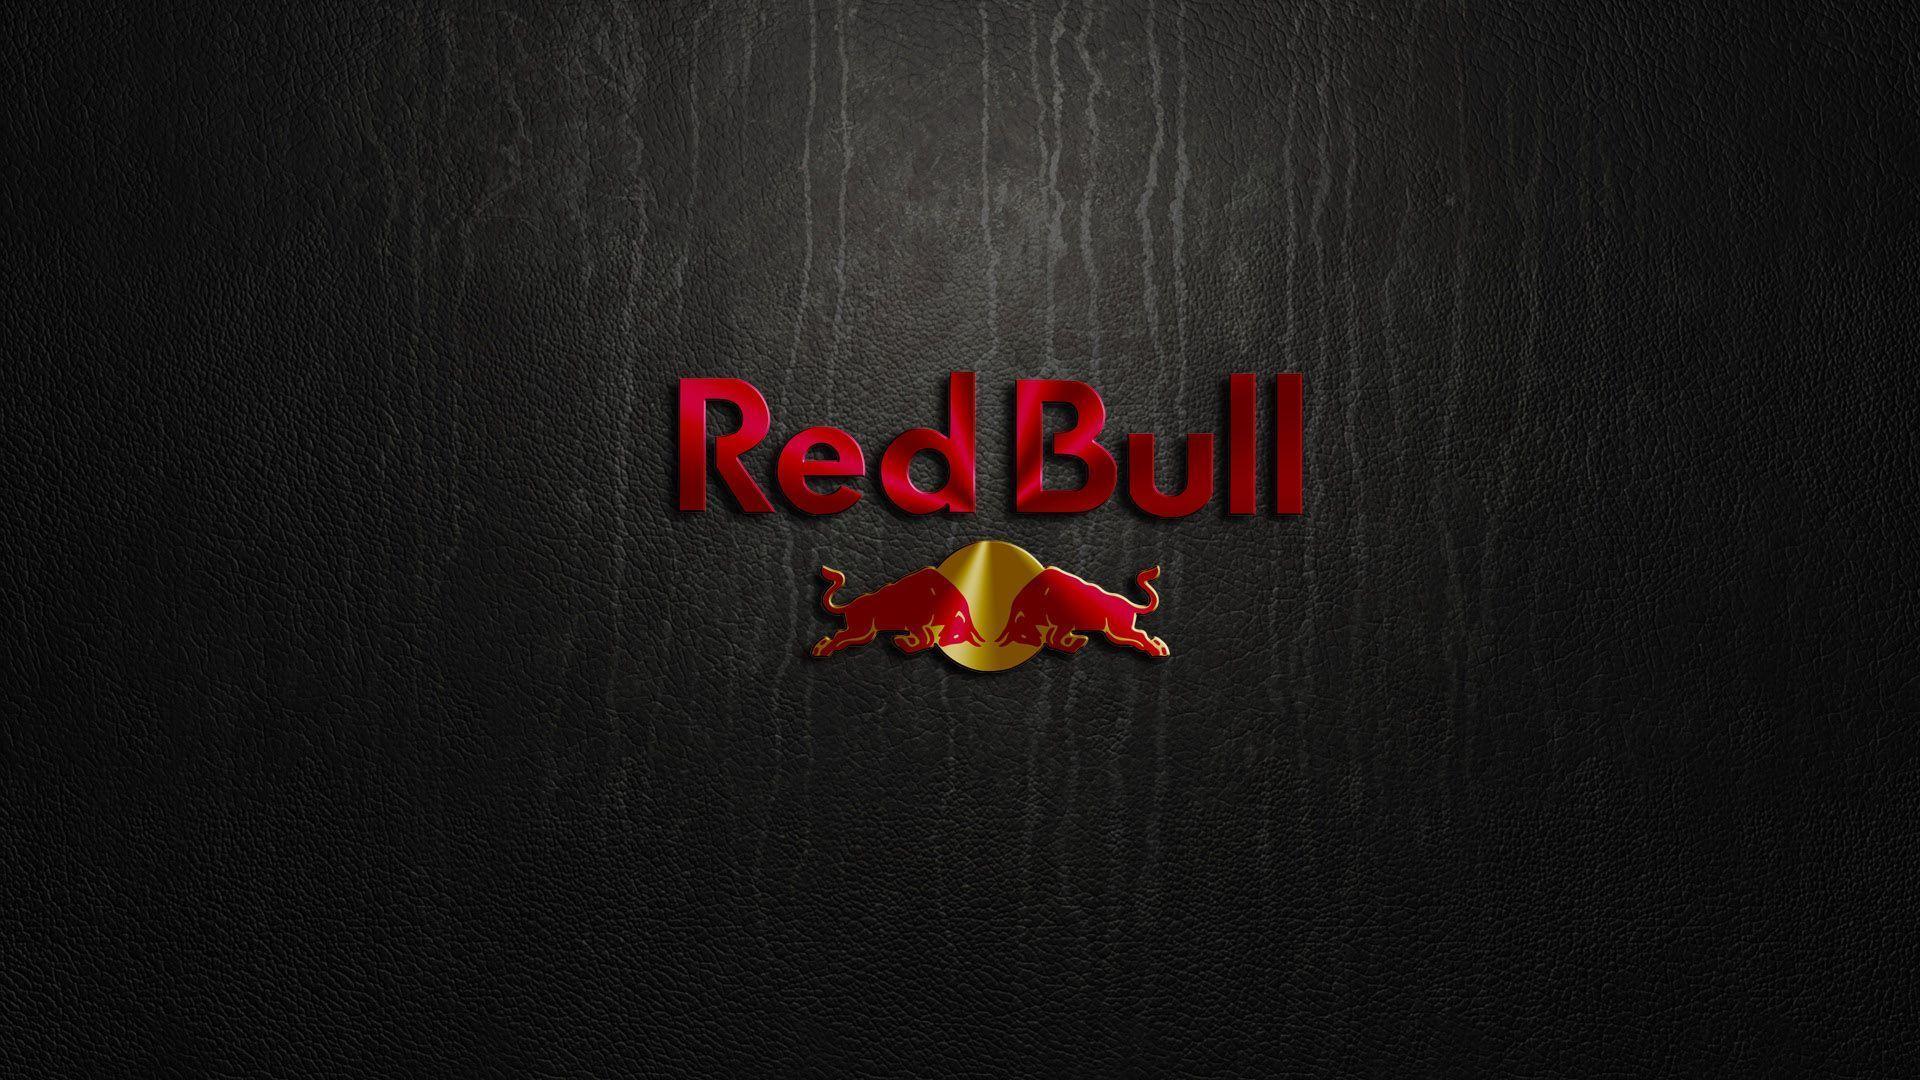 Cool Red Bull Logo Wallpaper Wide or HDD Wallpaper